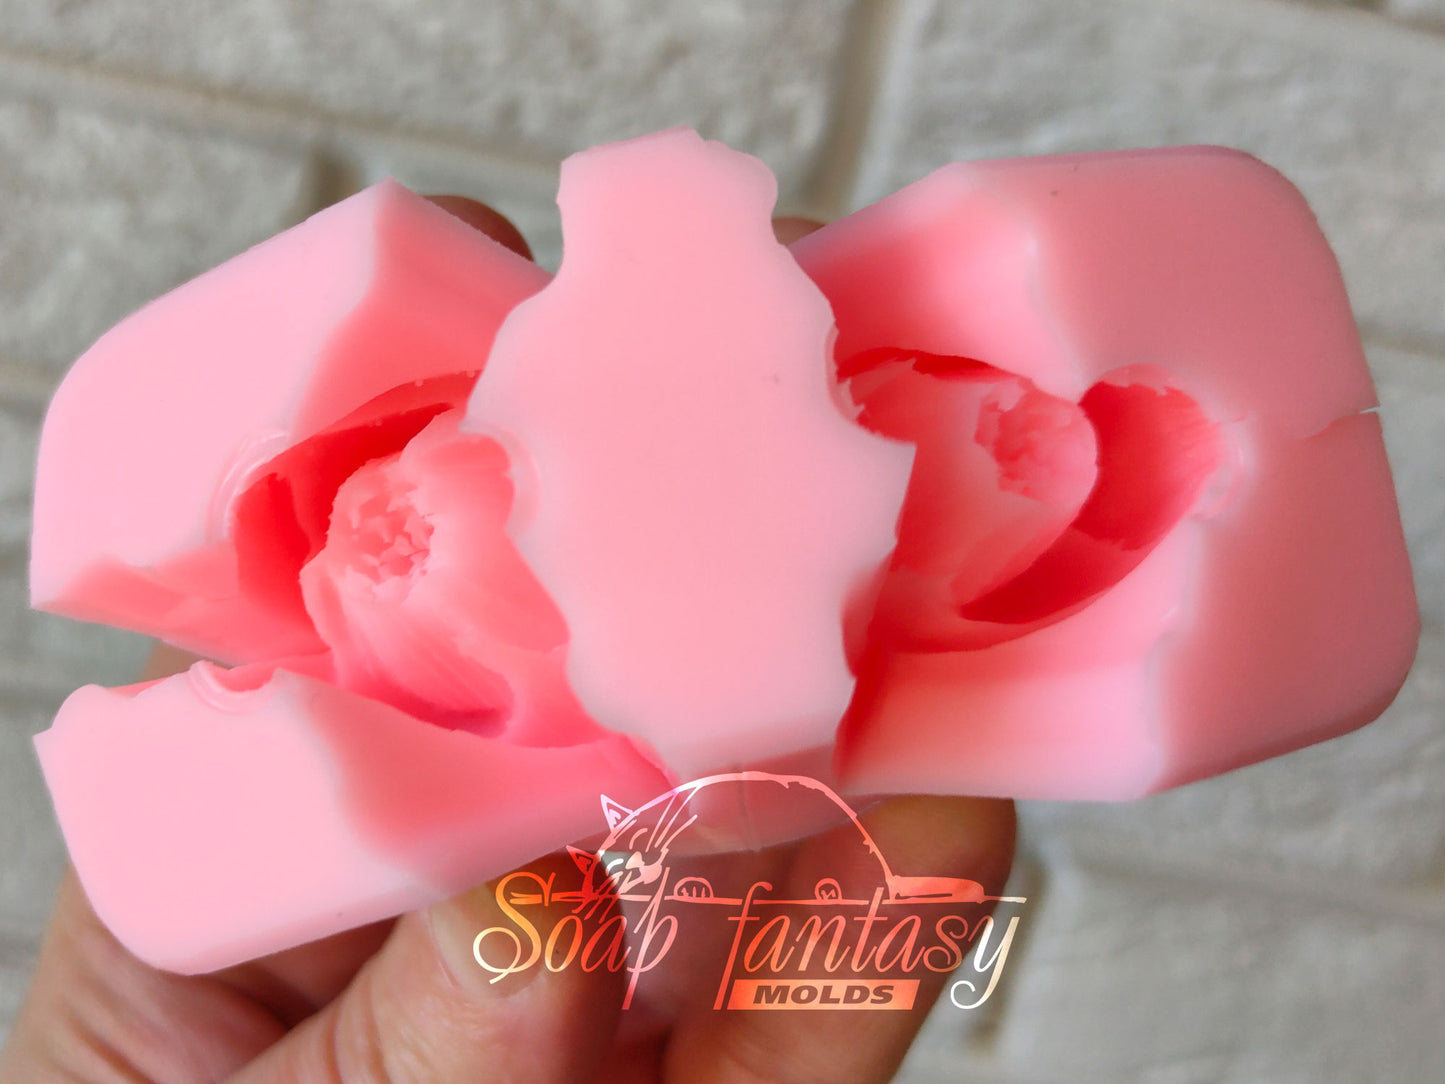 Magnolia flowers silicone mold for soap making